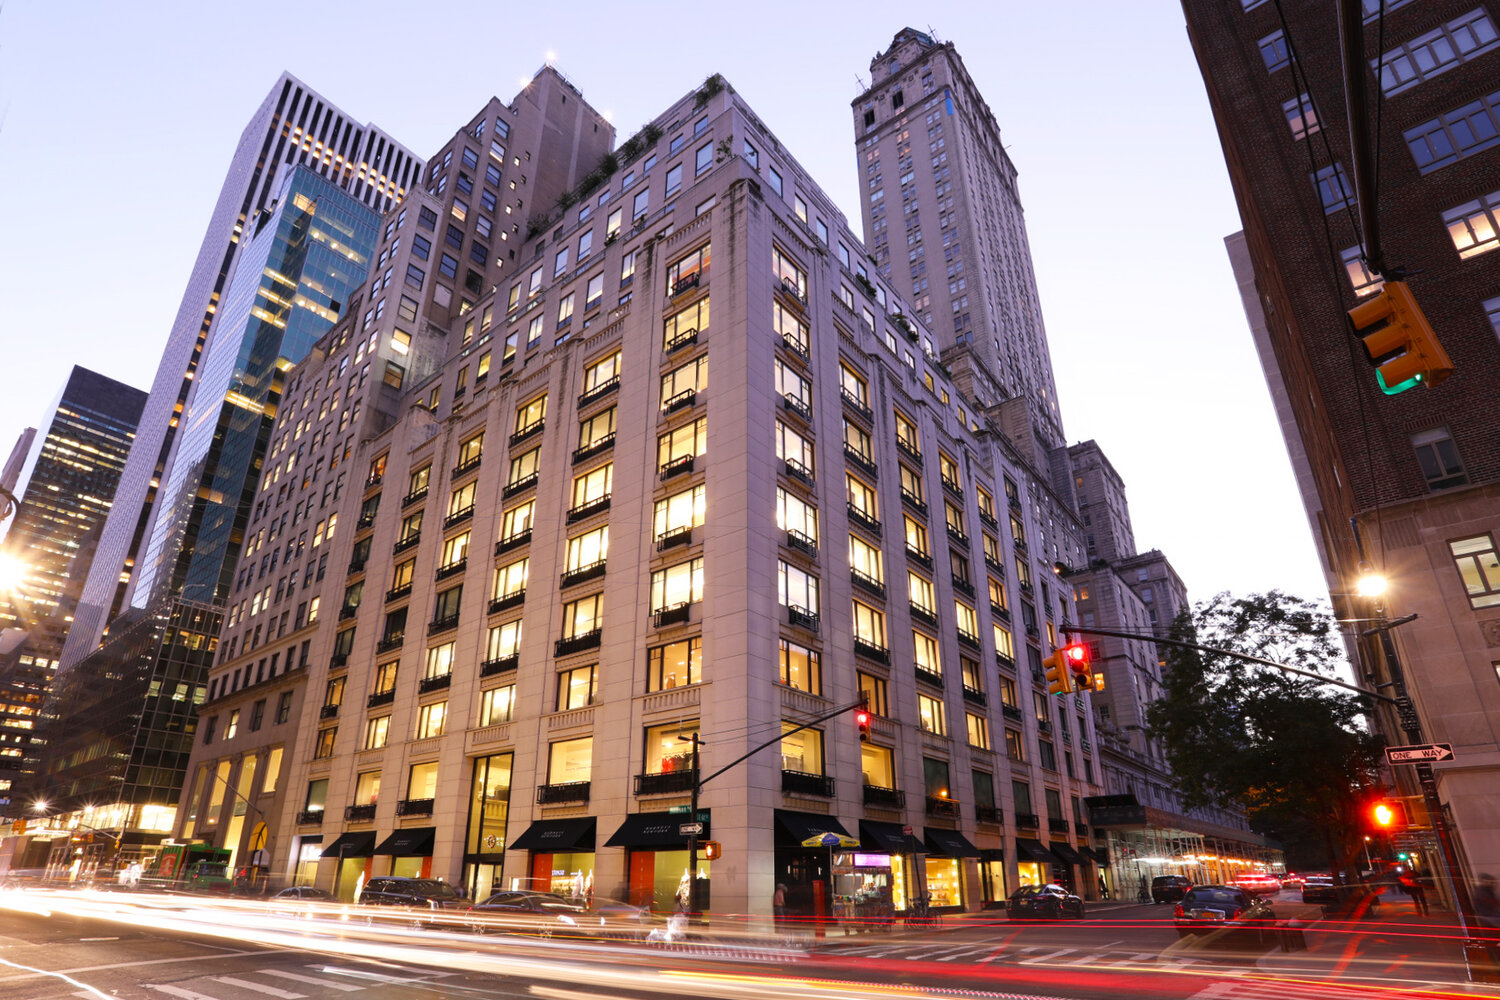 660 Madison Ave — Midtown Equities